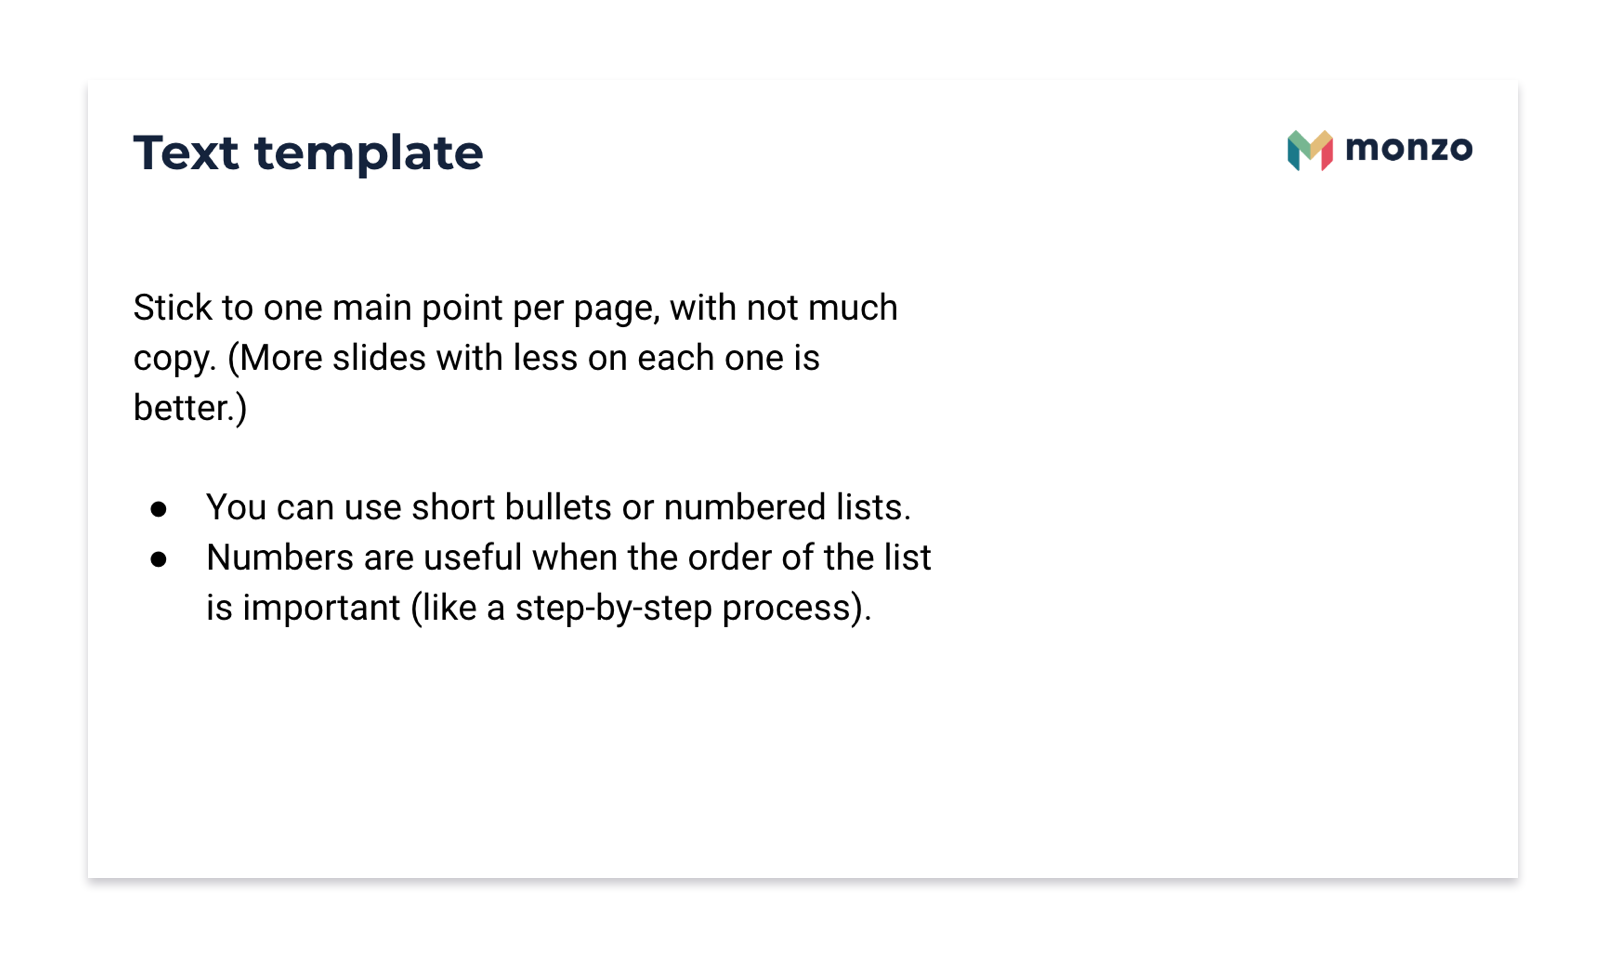 Monzo template slide. Text template. Stick to one point per page, with not much copy. (More slides with less on each one is better.)  You can use short bullets or numbered lists. Numbers are useful when the order of the list is important (like a step-by-step process).